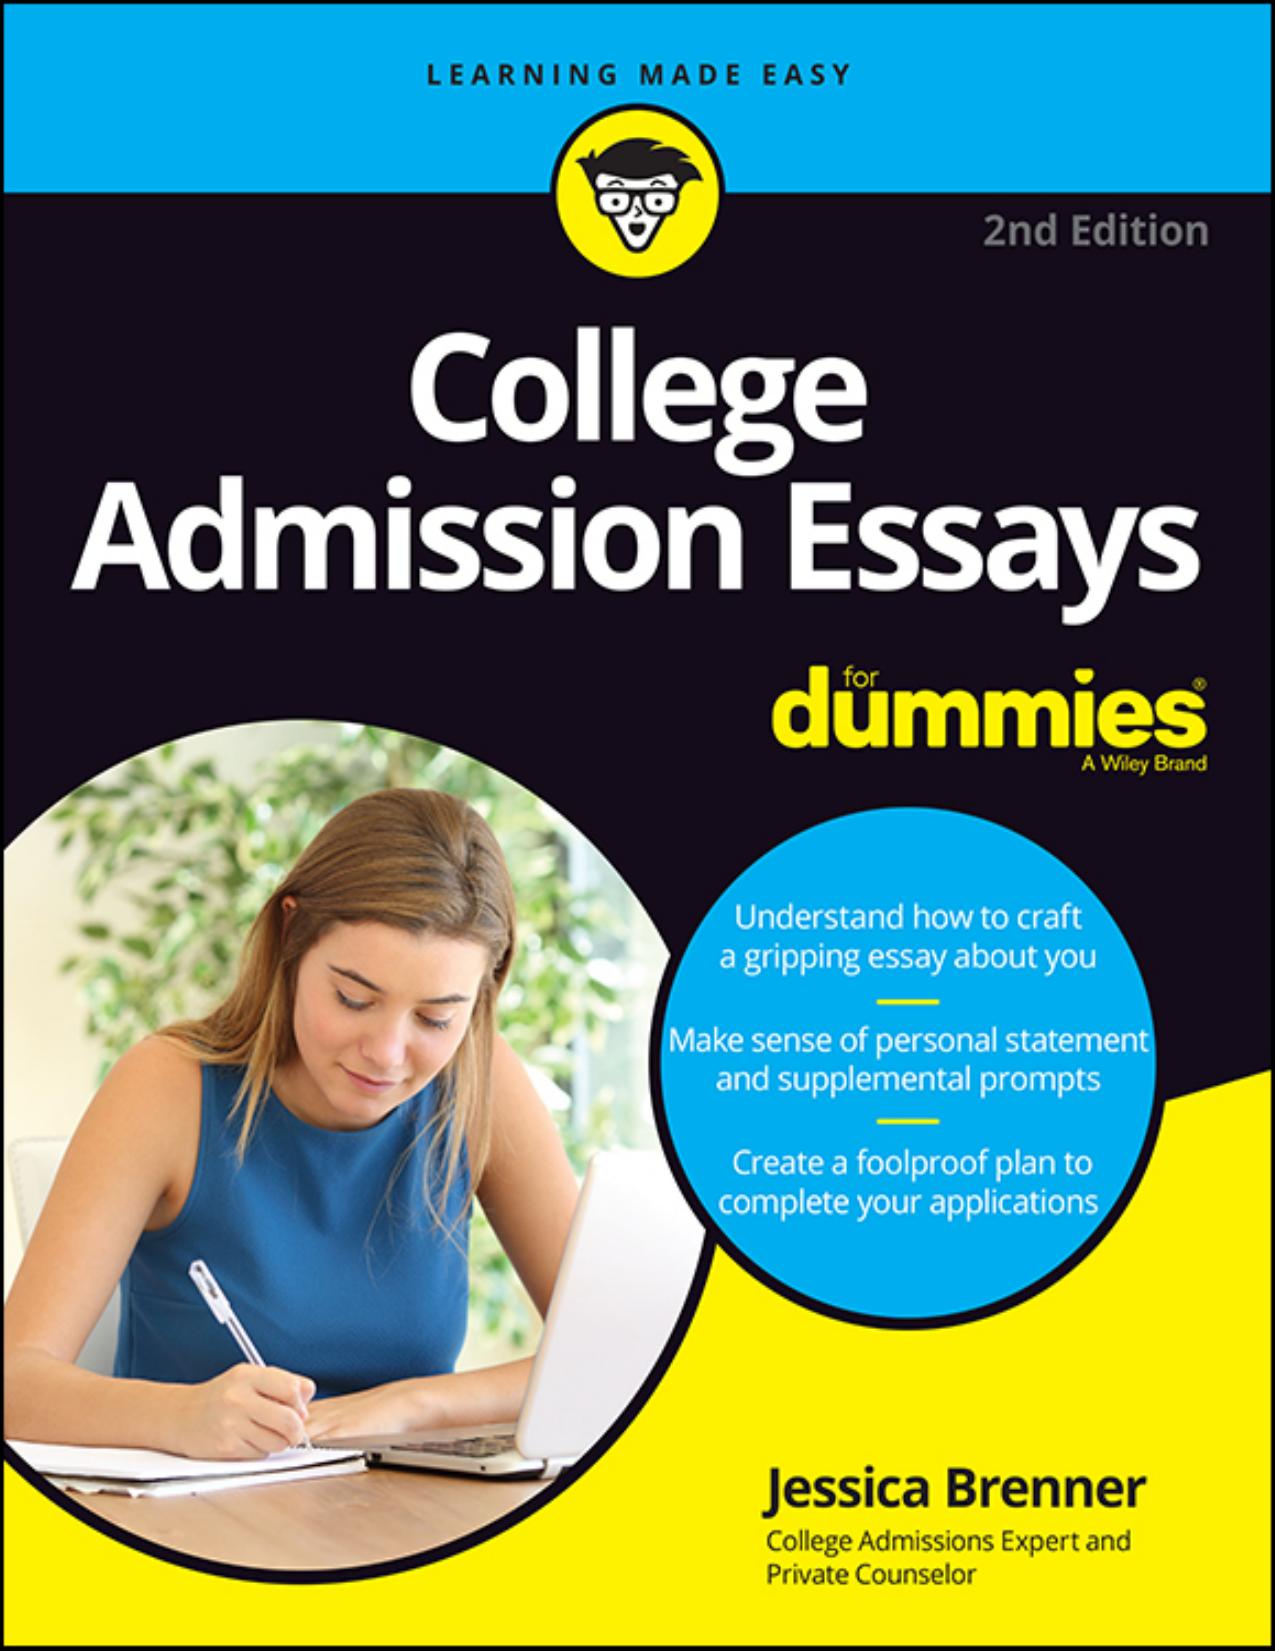 College Admission Essays for Dummies 2nd Edition by Brenner, Jessica